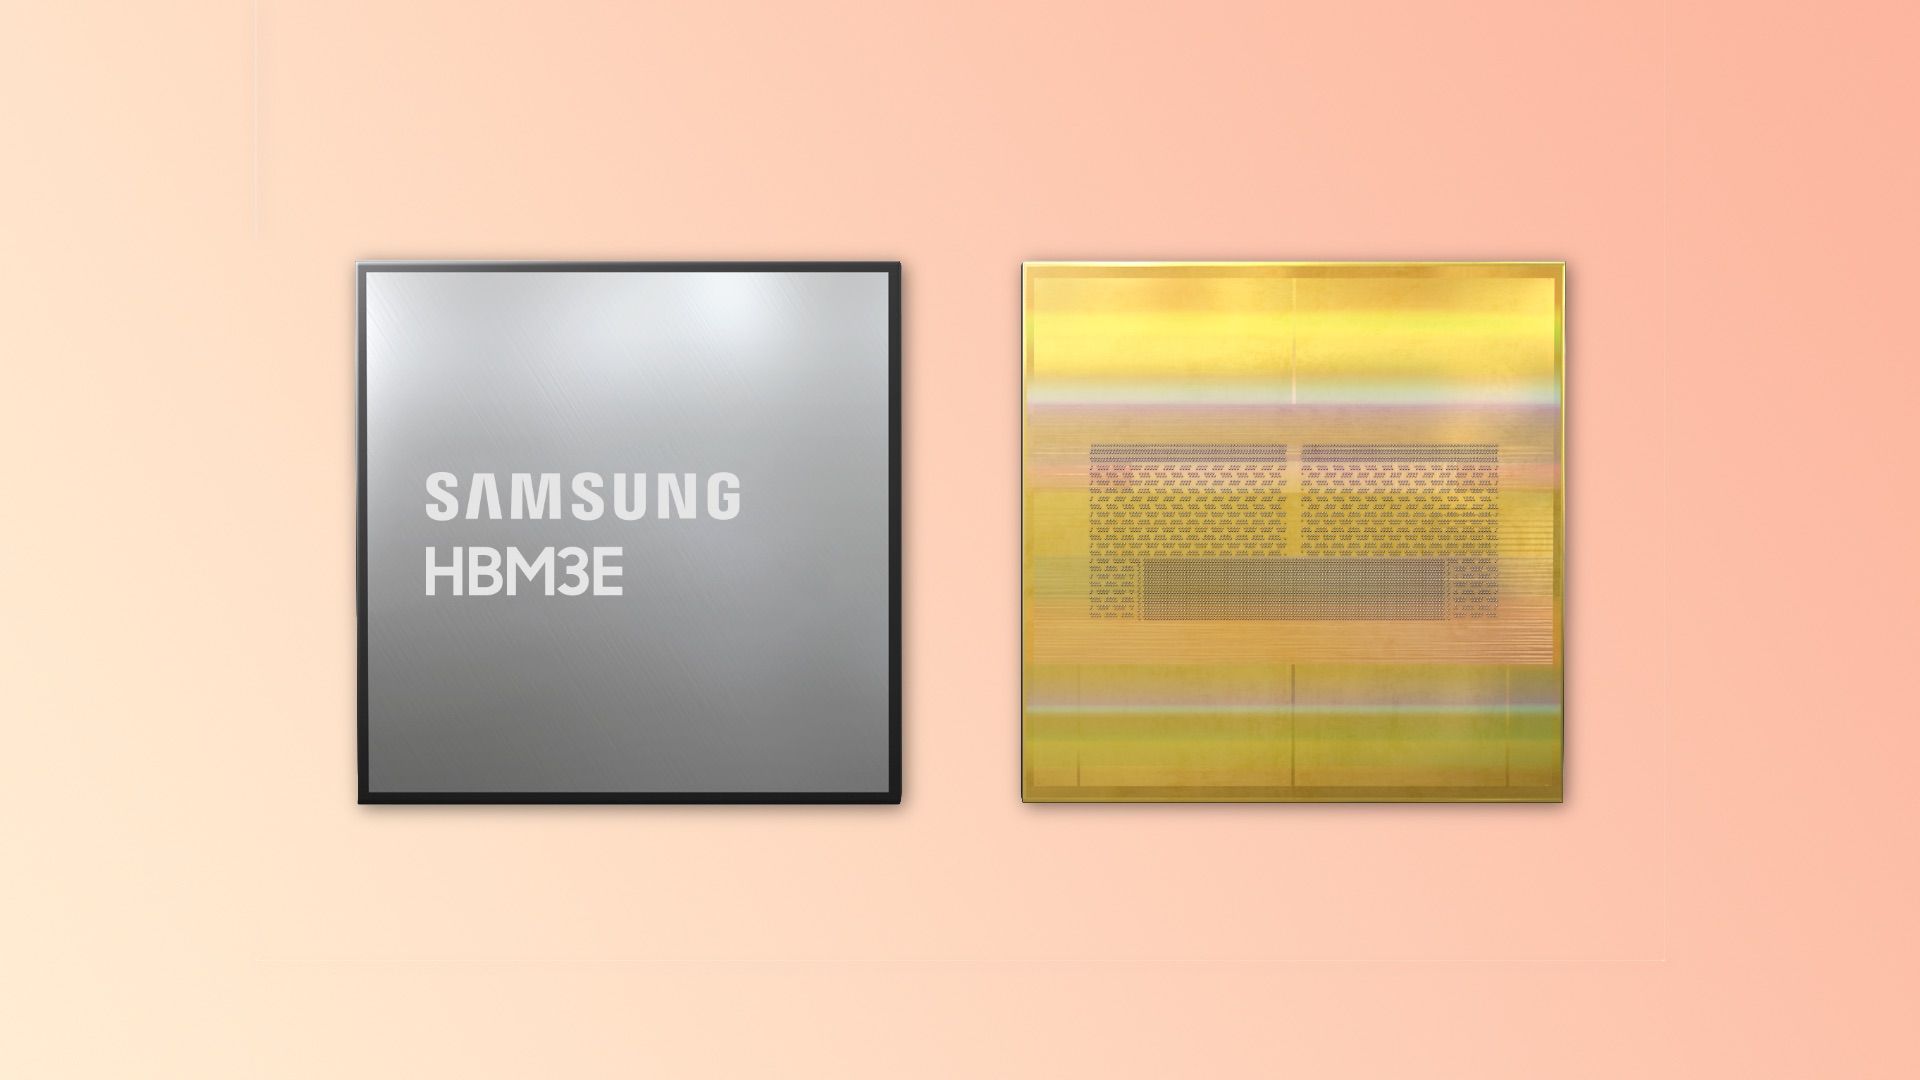 Samsung may receive certification for Nvidia's HBM3E chips by November 2024